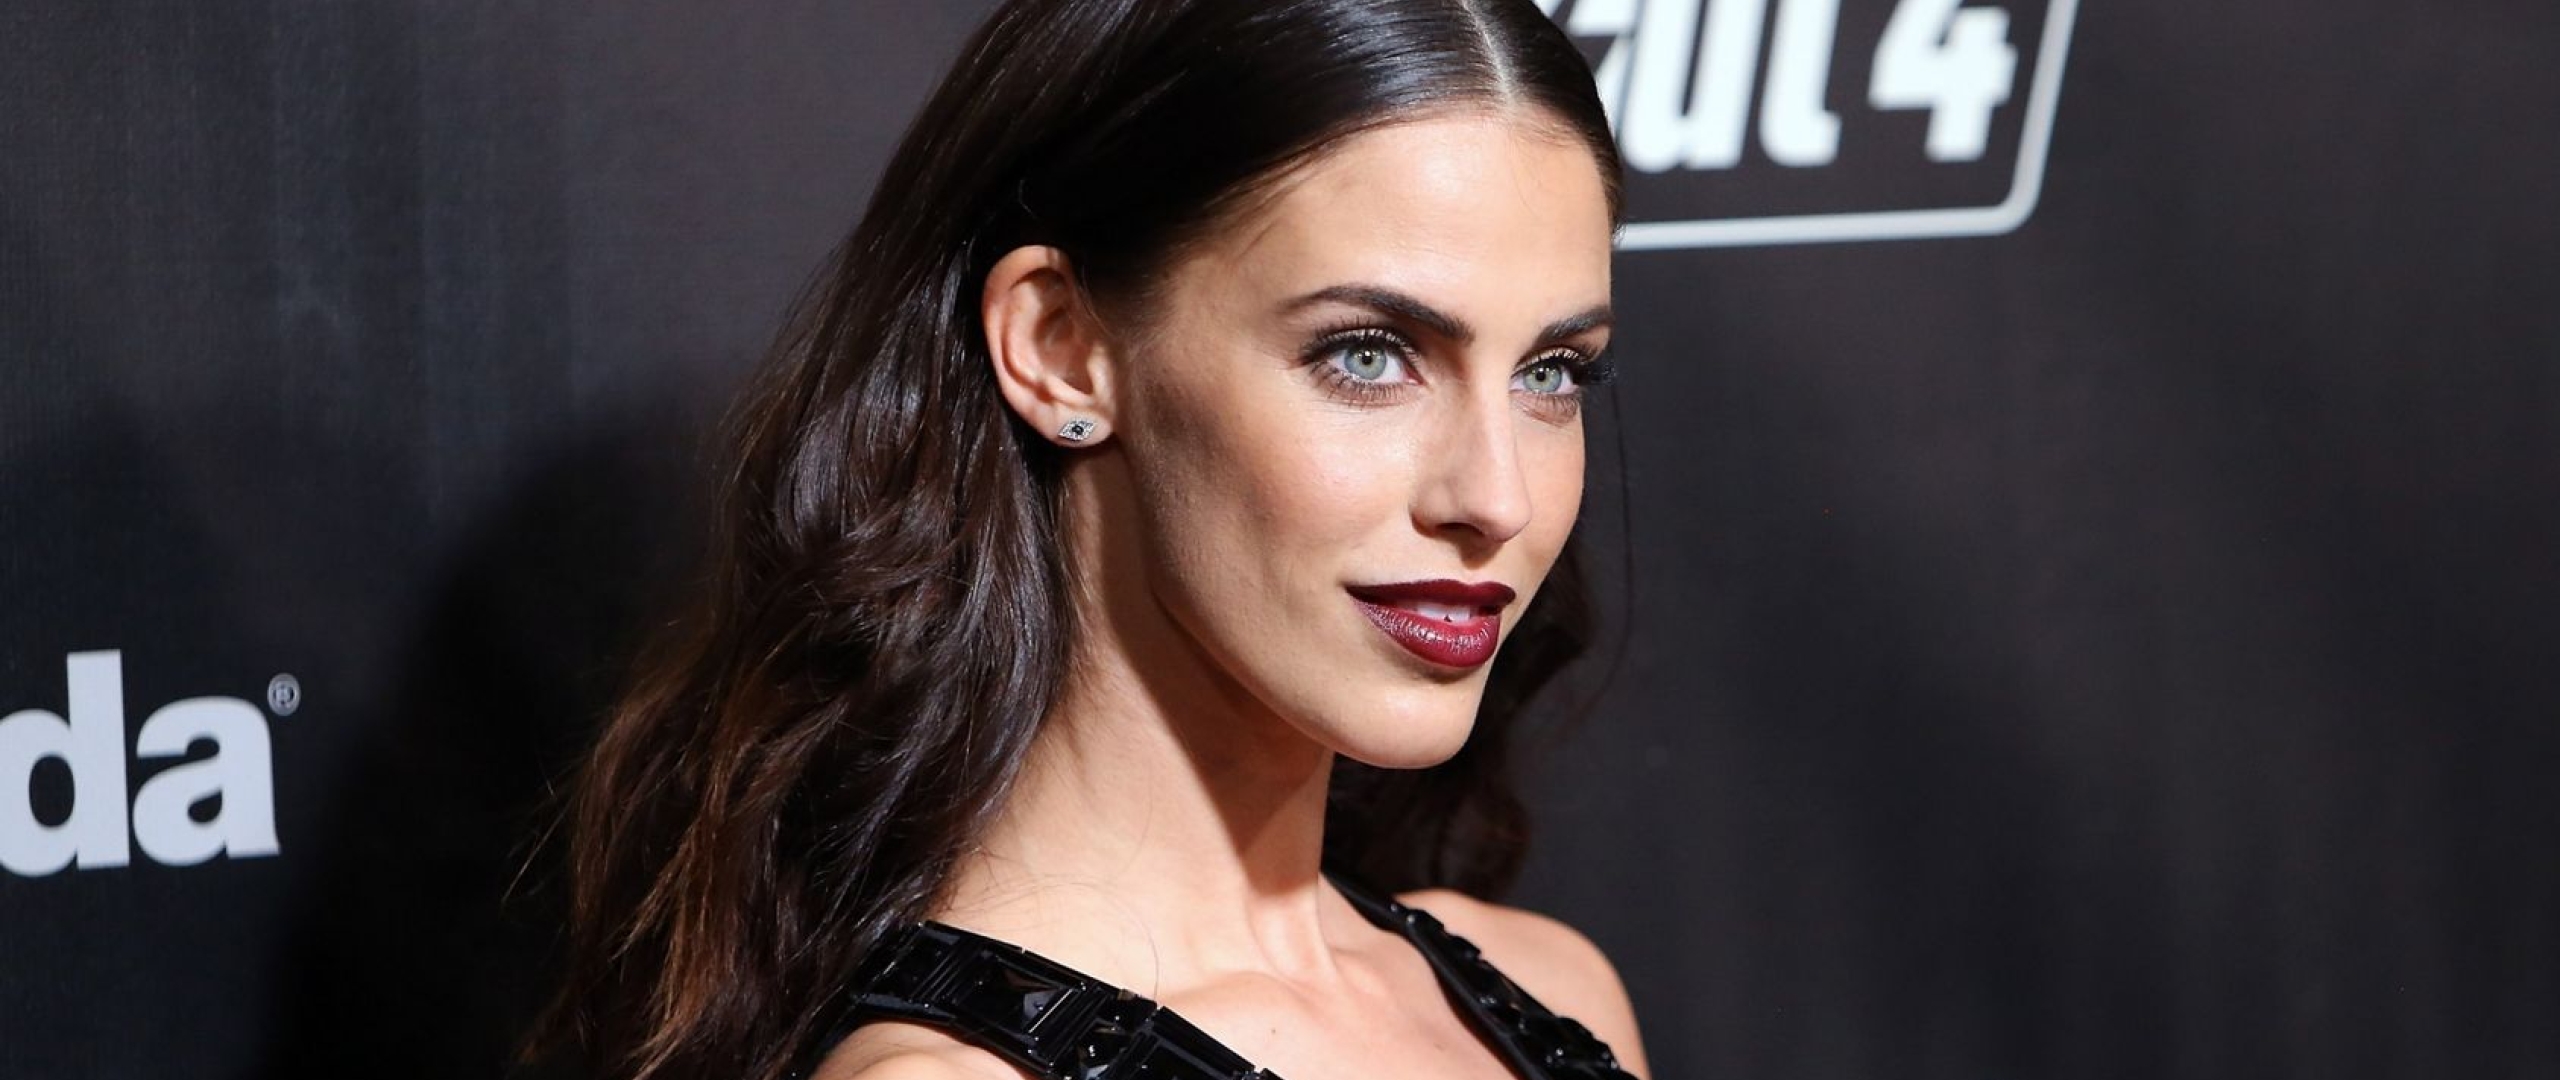 2560x1080 Resolution jessica lowndes, actress, brunette 2560x1080 ...